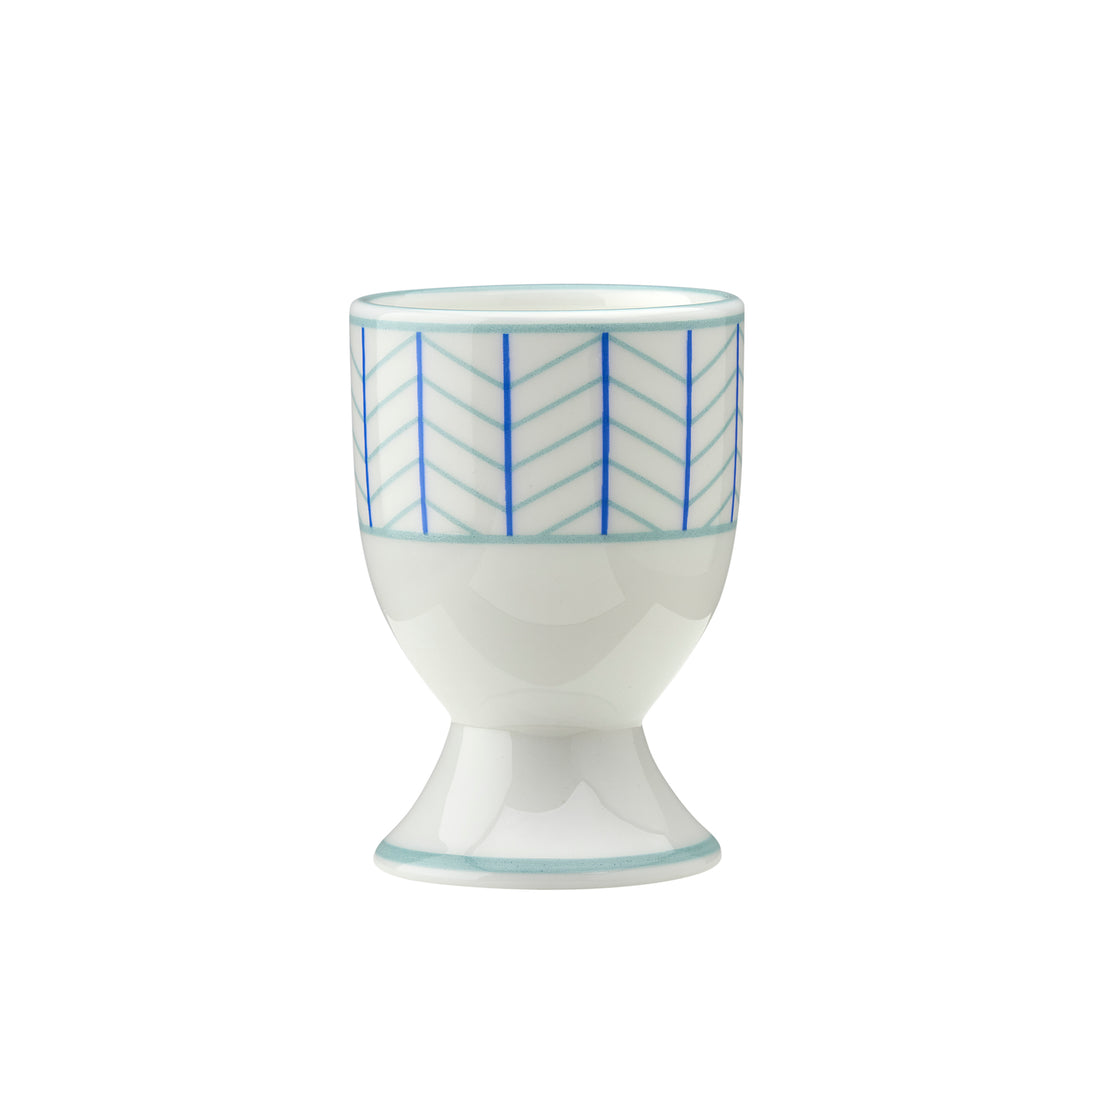 Ebb Egg Cup in Blue & Turquoise